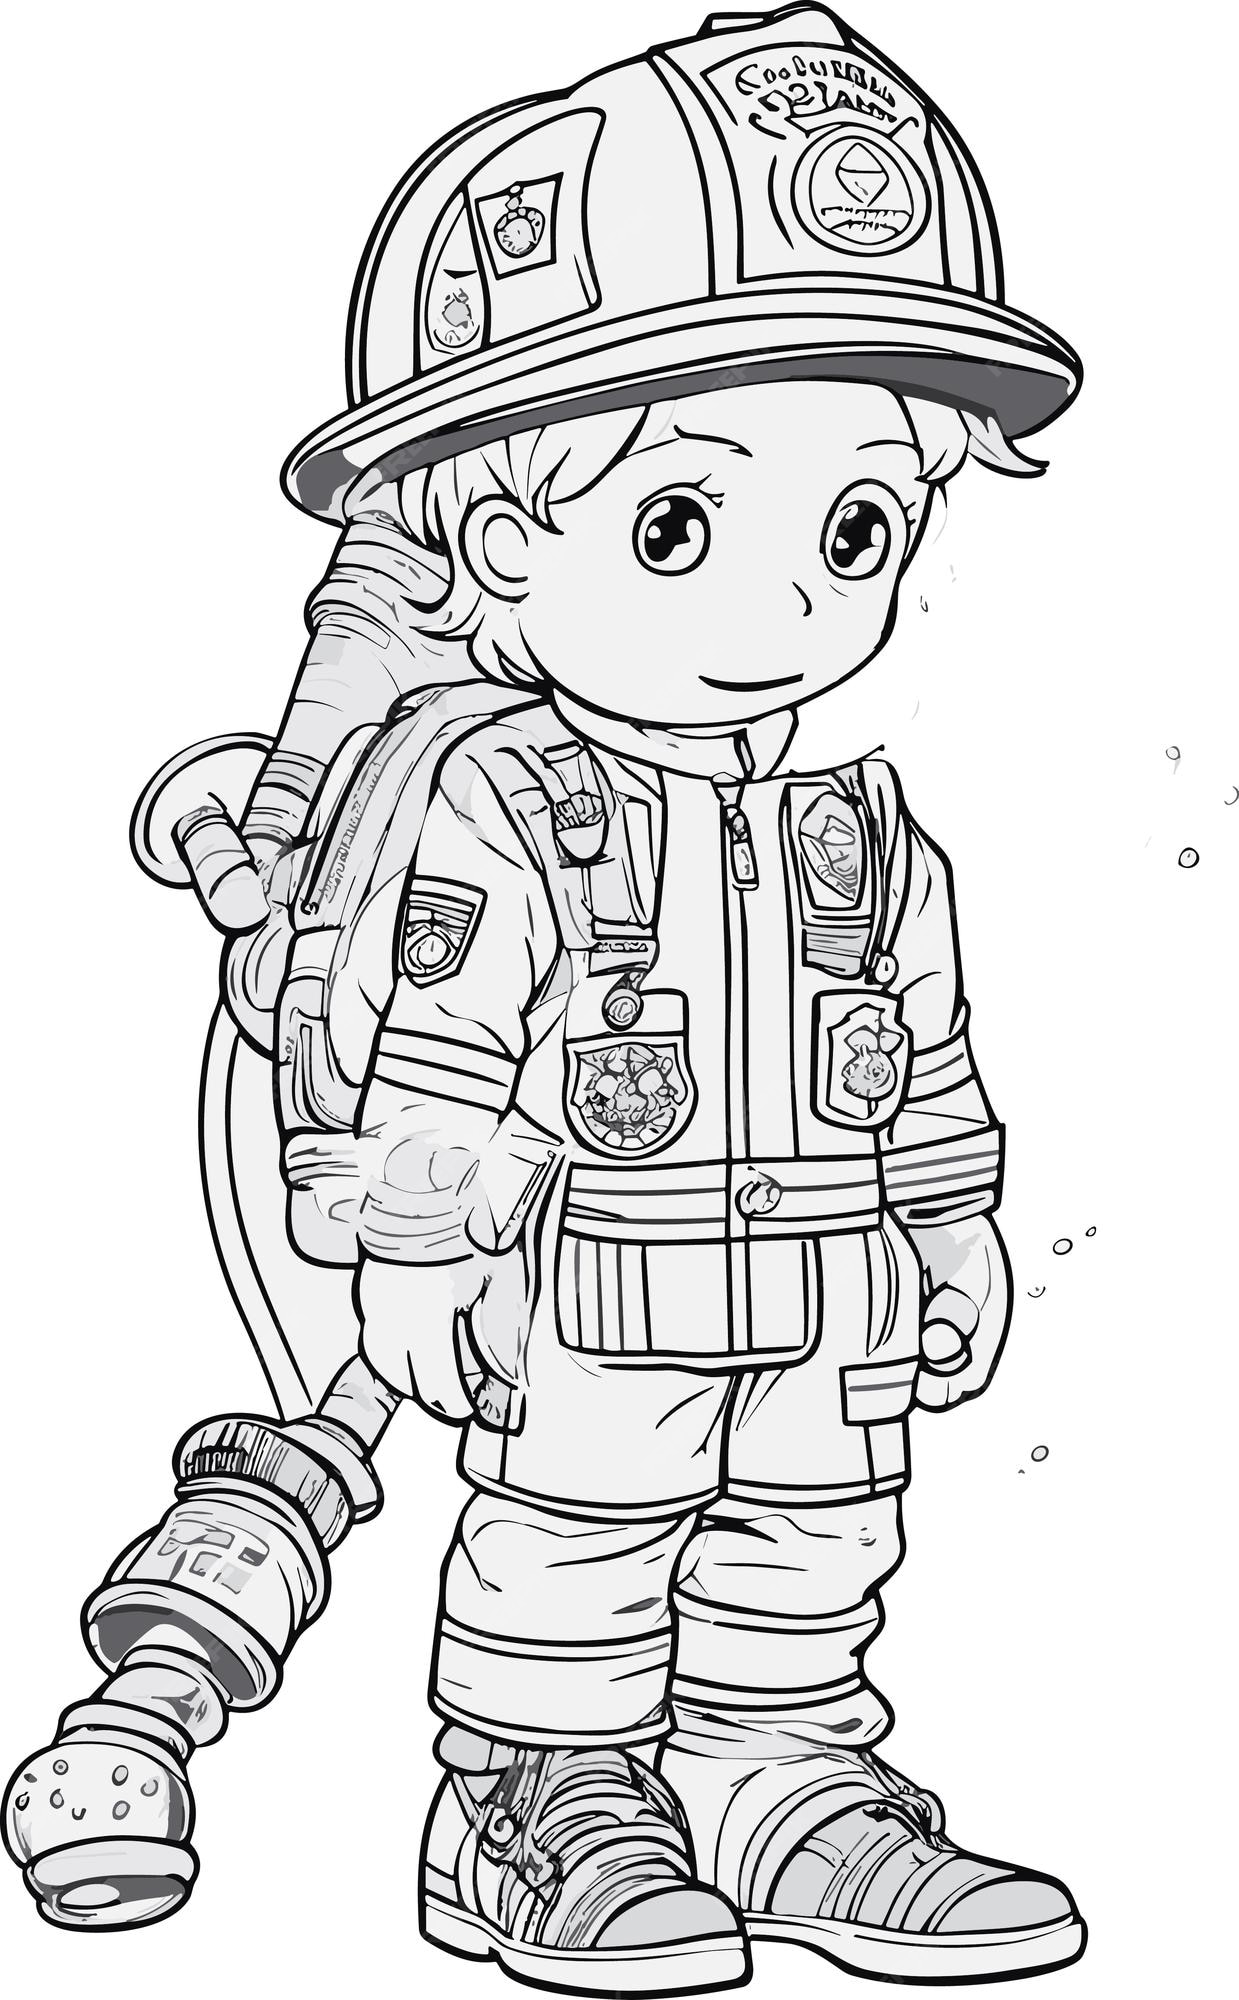 Premium vector fearless firefighter printable coloring page for kids